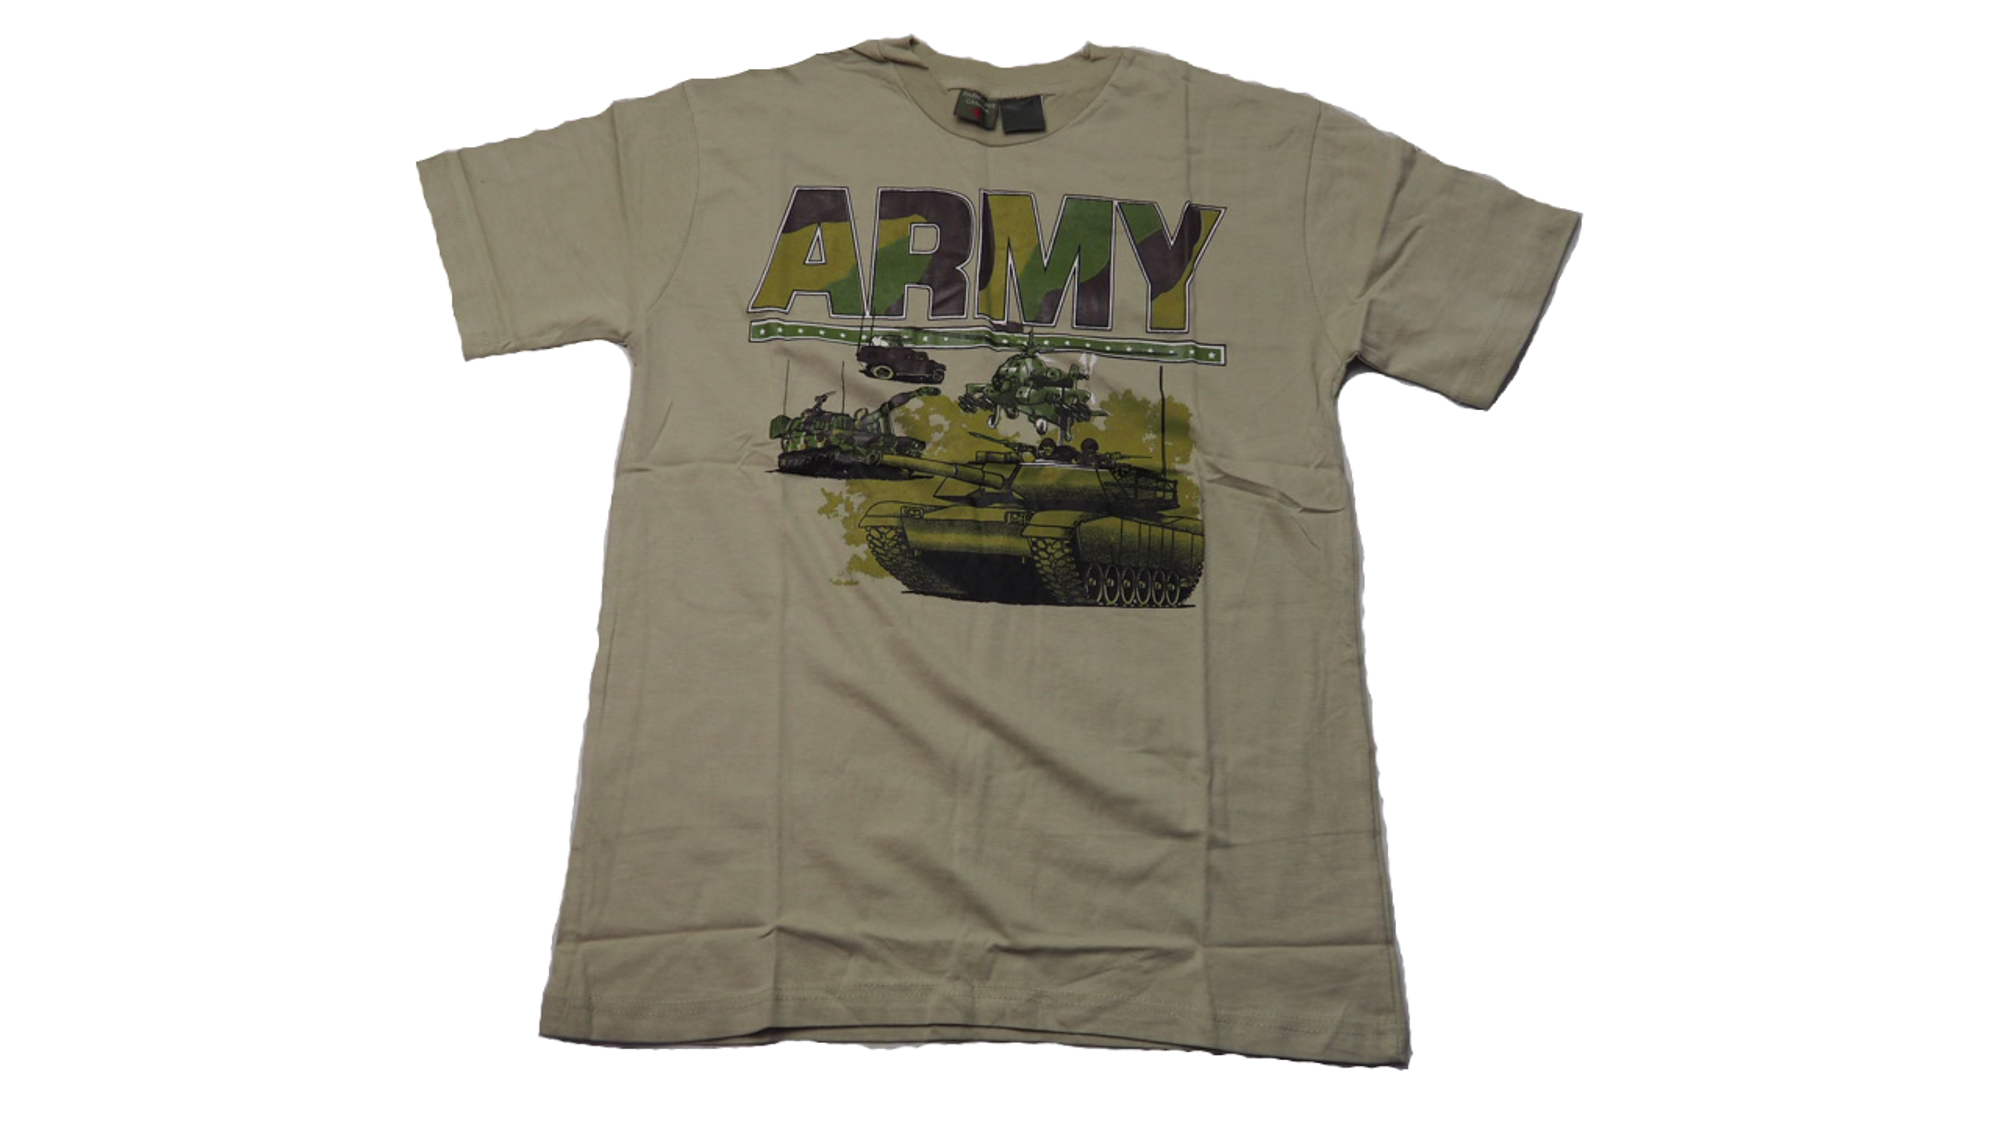 ARMY Graphic T-Shirt